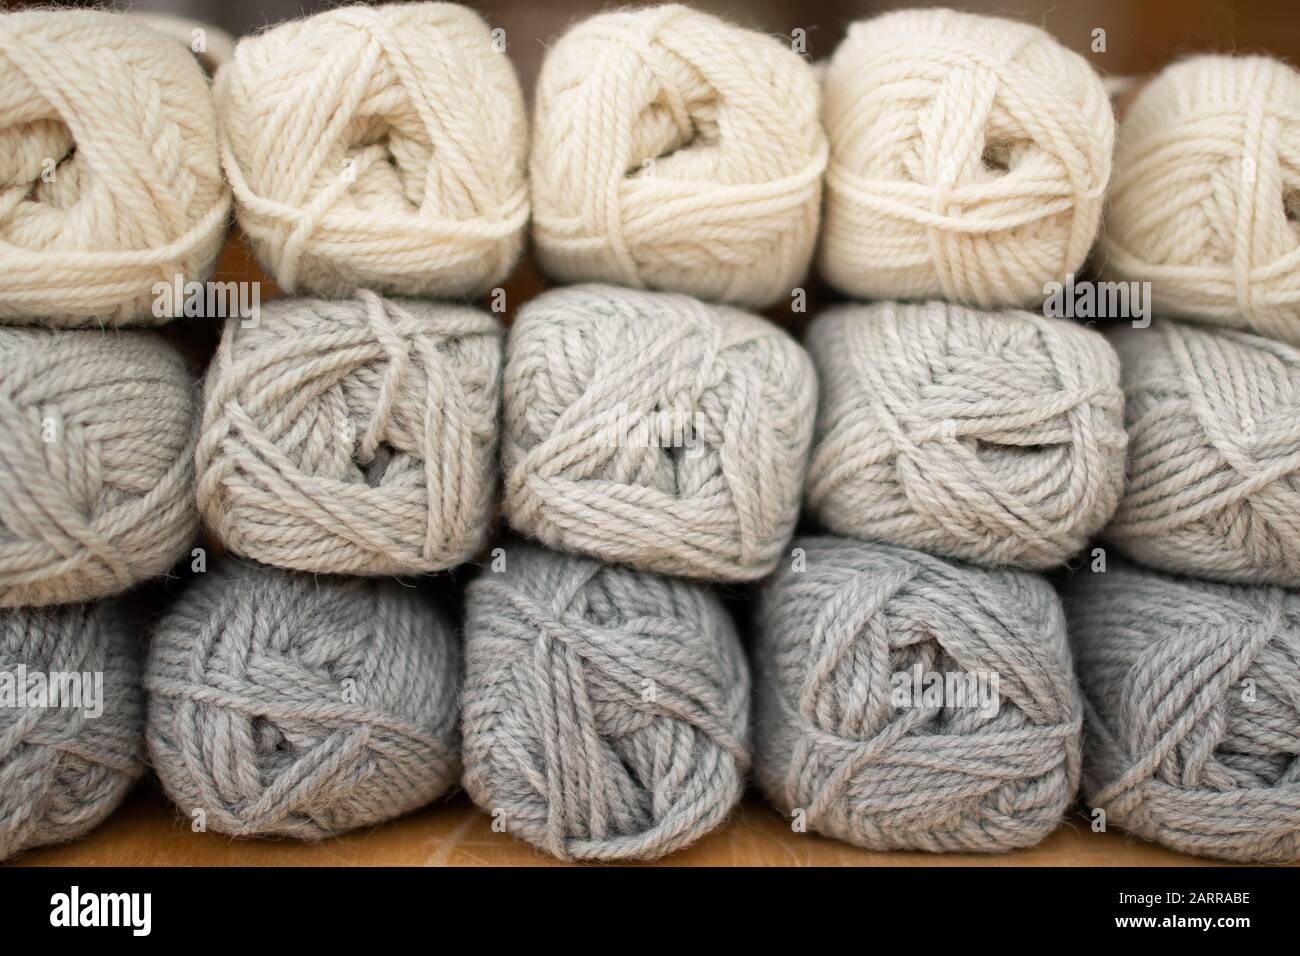 neutral colours - balls of wool in shades of grey and off white Stock Photo